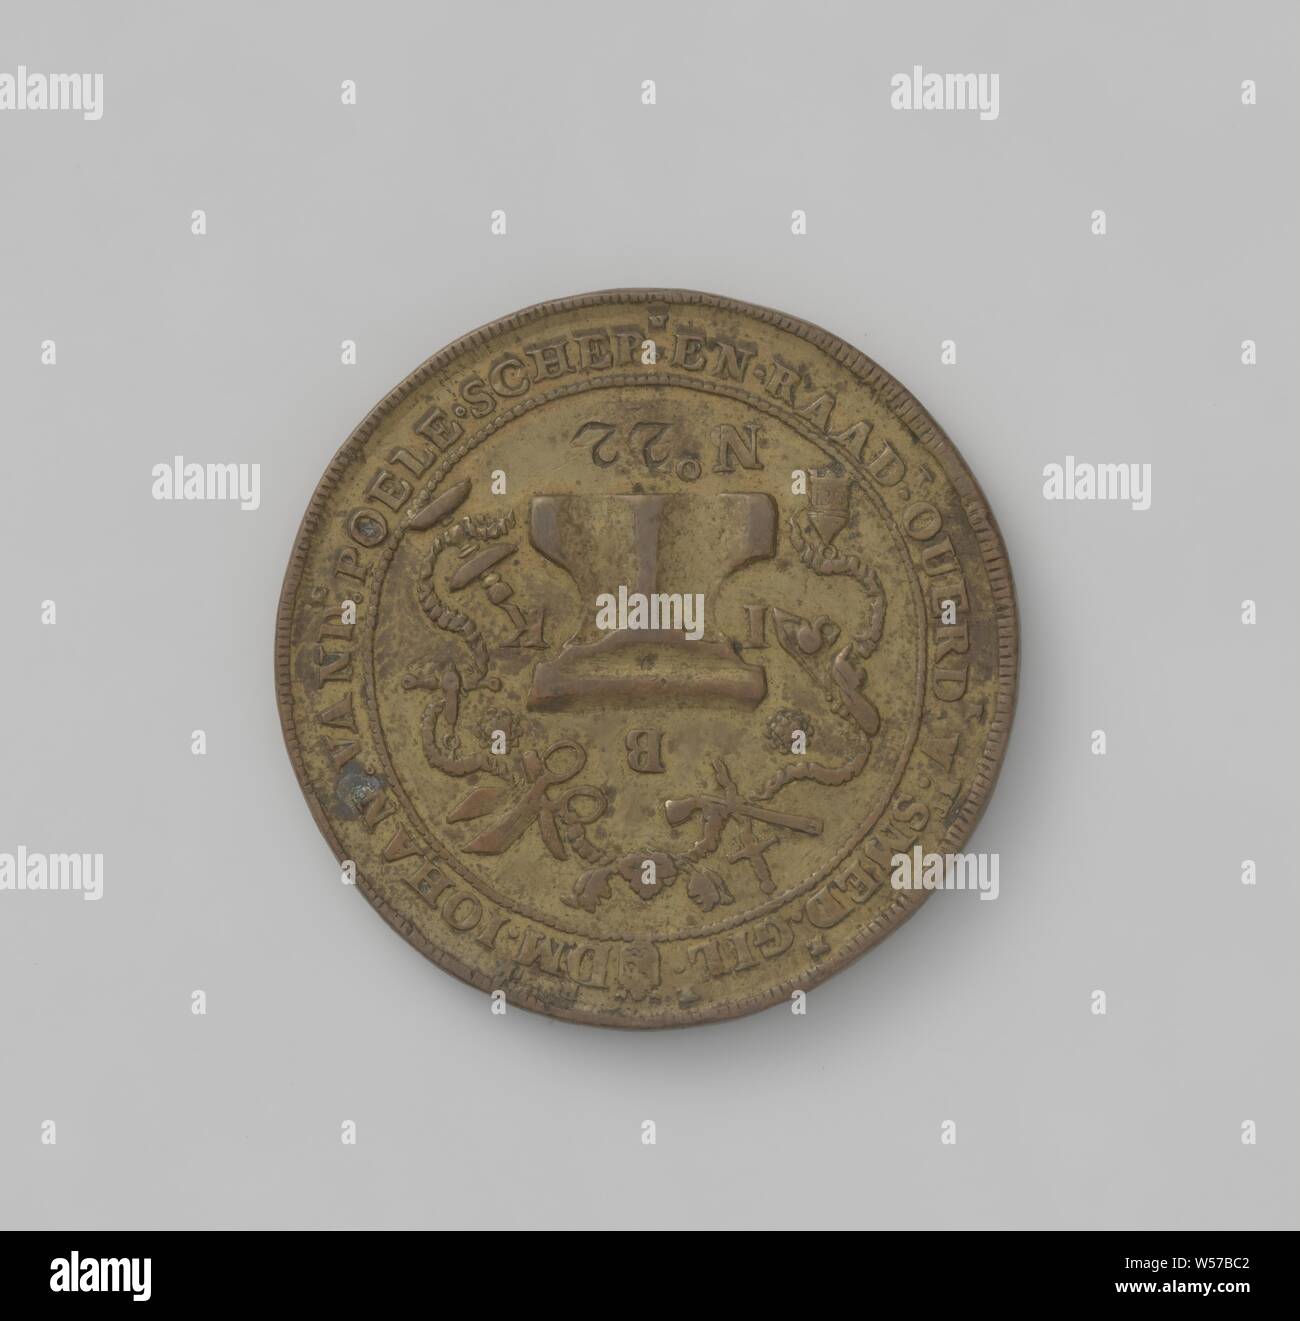 Blacksmith's Guild of Middelburg, guild token with no. 22, Brass token. Front: anvil surrounded by the letters I, B and K, around it a chain, on which hang a lantern, gun lock, daggers, gun, scissors, balance and candlestick, below: number 22 within a circle. Reverse: crowned front hammer between years, surrounded by a chain, on which two crossed buses, a horseshoe, an anchor, a door lock with a key, a shaft and a boiler hang within a circle, Middelburg, Johan van de Poele, Jans. van den Drissen, Am. Rickaart, Har. van Vollenhoo, P. Hack, Willem du Pre, 1690, brass (alloy), engraving, d 4.7 cm Stock Photo